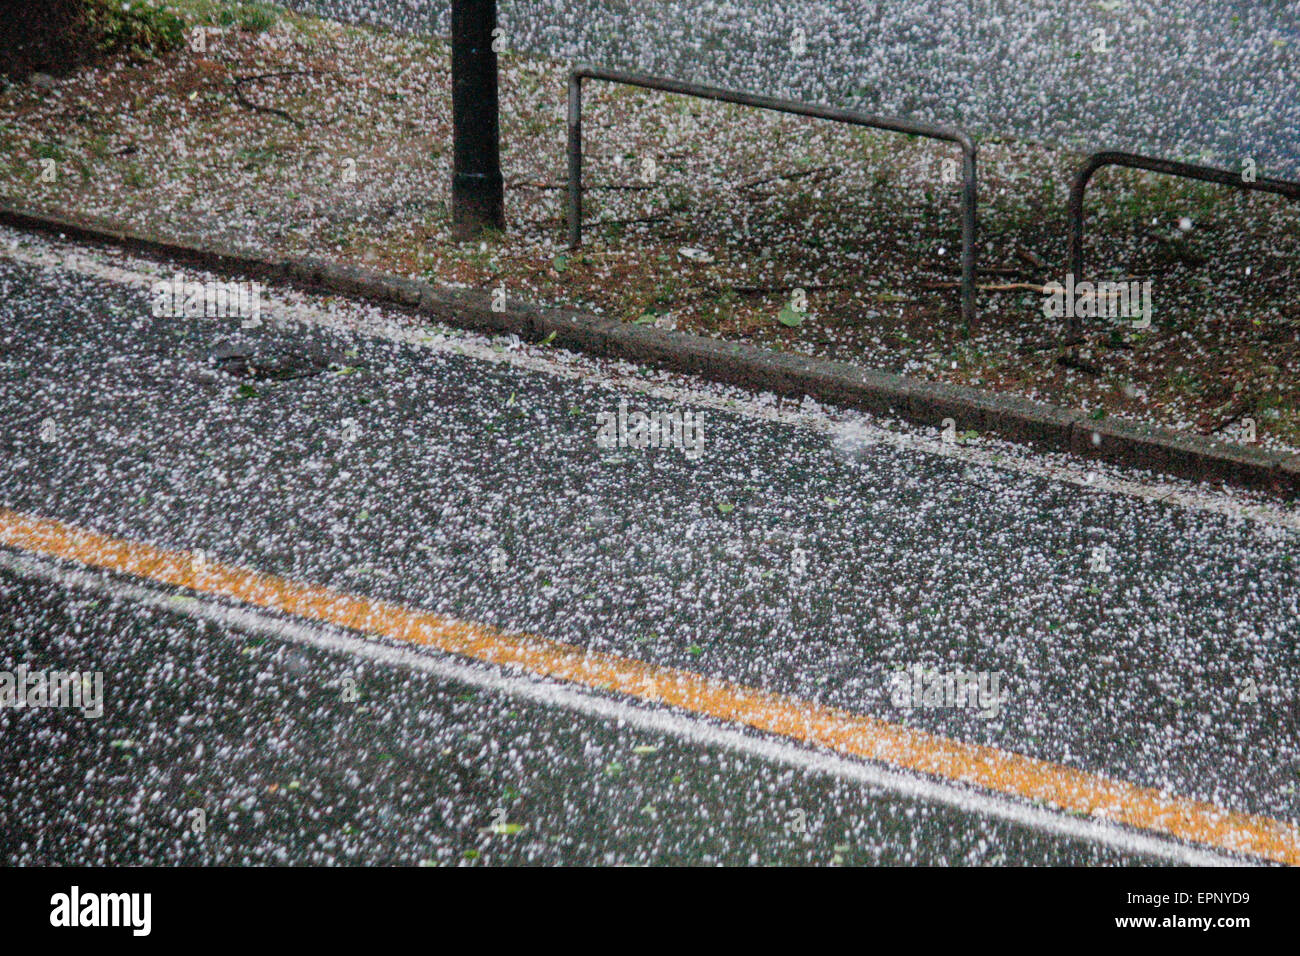 Turin, Italy. 20th May, 2015. A sudden hailstorm hit the city of Turin, making the road surface white as if there was snow. © Elena Aquila/Pacific Press/Alamy Live News Stock Photo